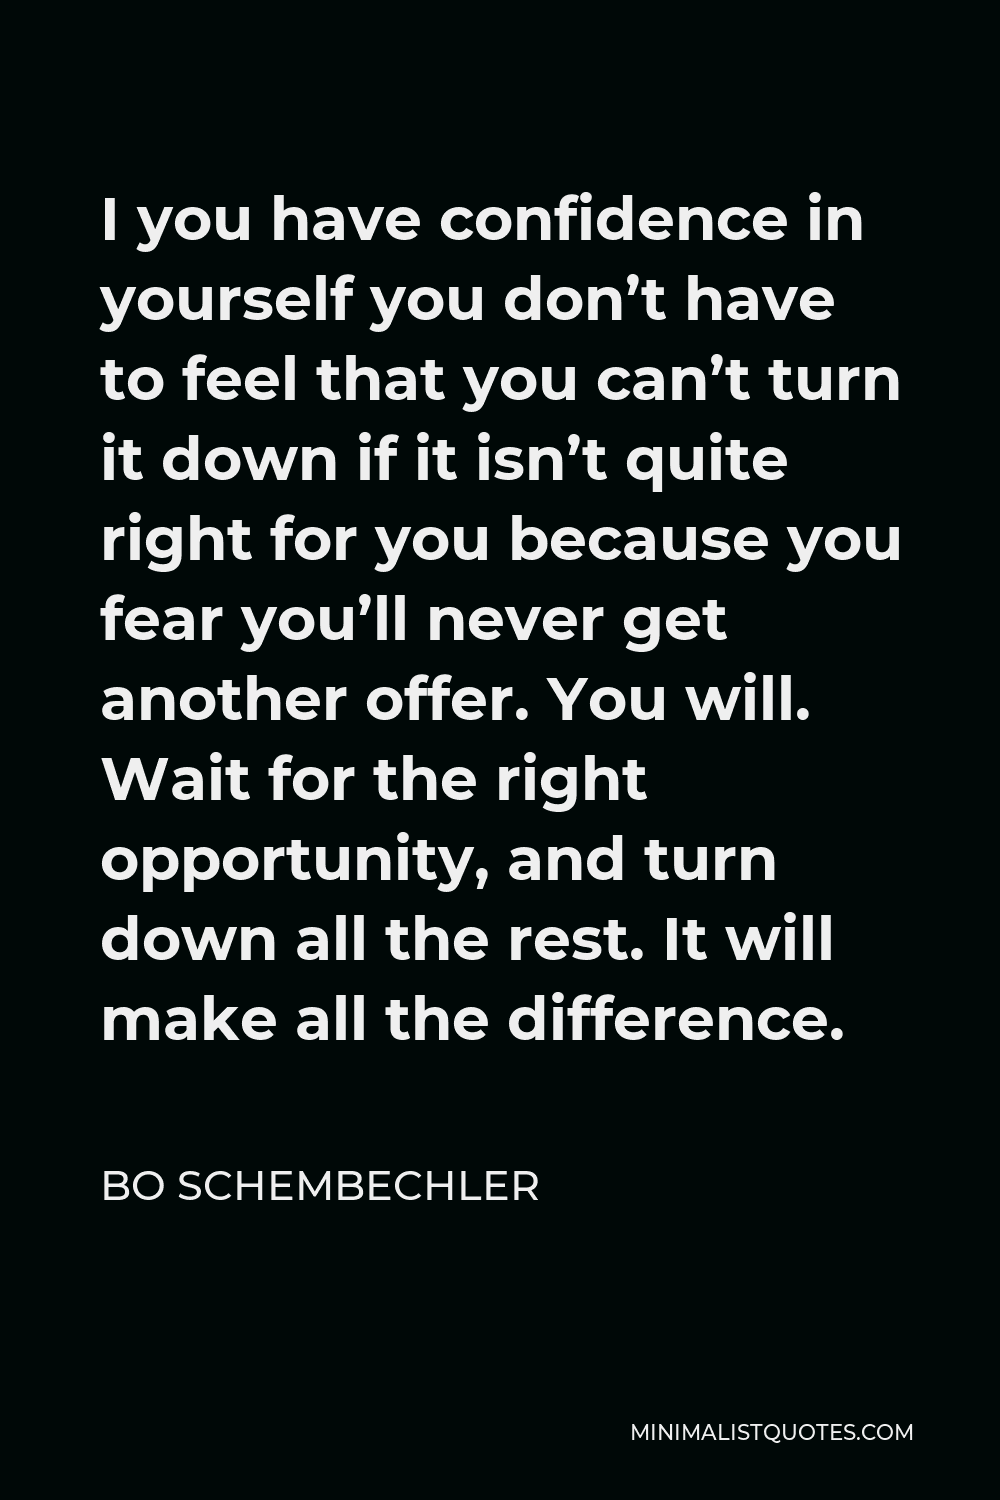 Bo Schembechler Quote - I you have confidence in yourself you don’t have to feel that you can’t turn it down if it isn’t quite right for you because you fear you’ll never get another offer. You will. Wait for the right opportunity, and turn down all the rest. It will make all the difference.